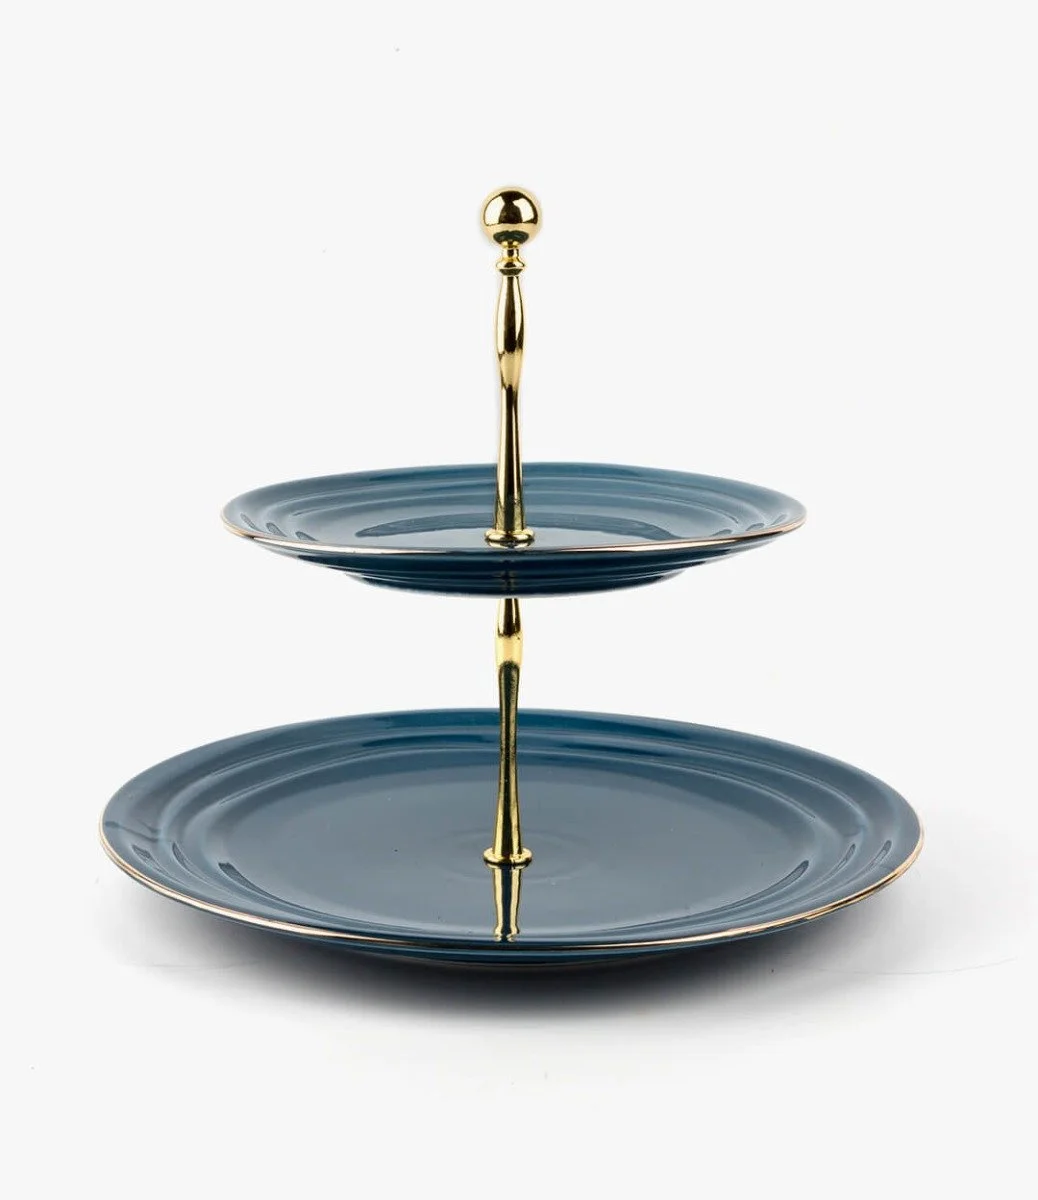 Blue - 2 Tier Plate From Harmony